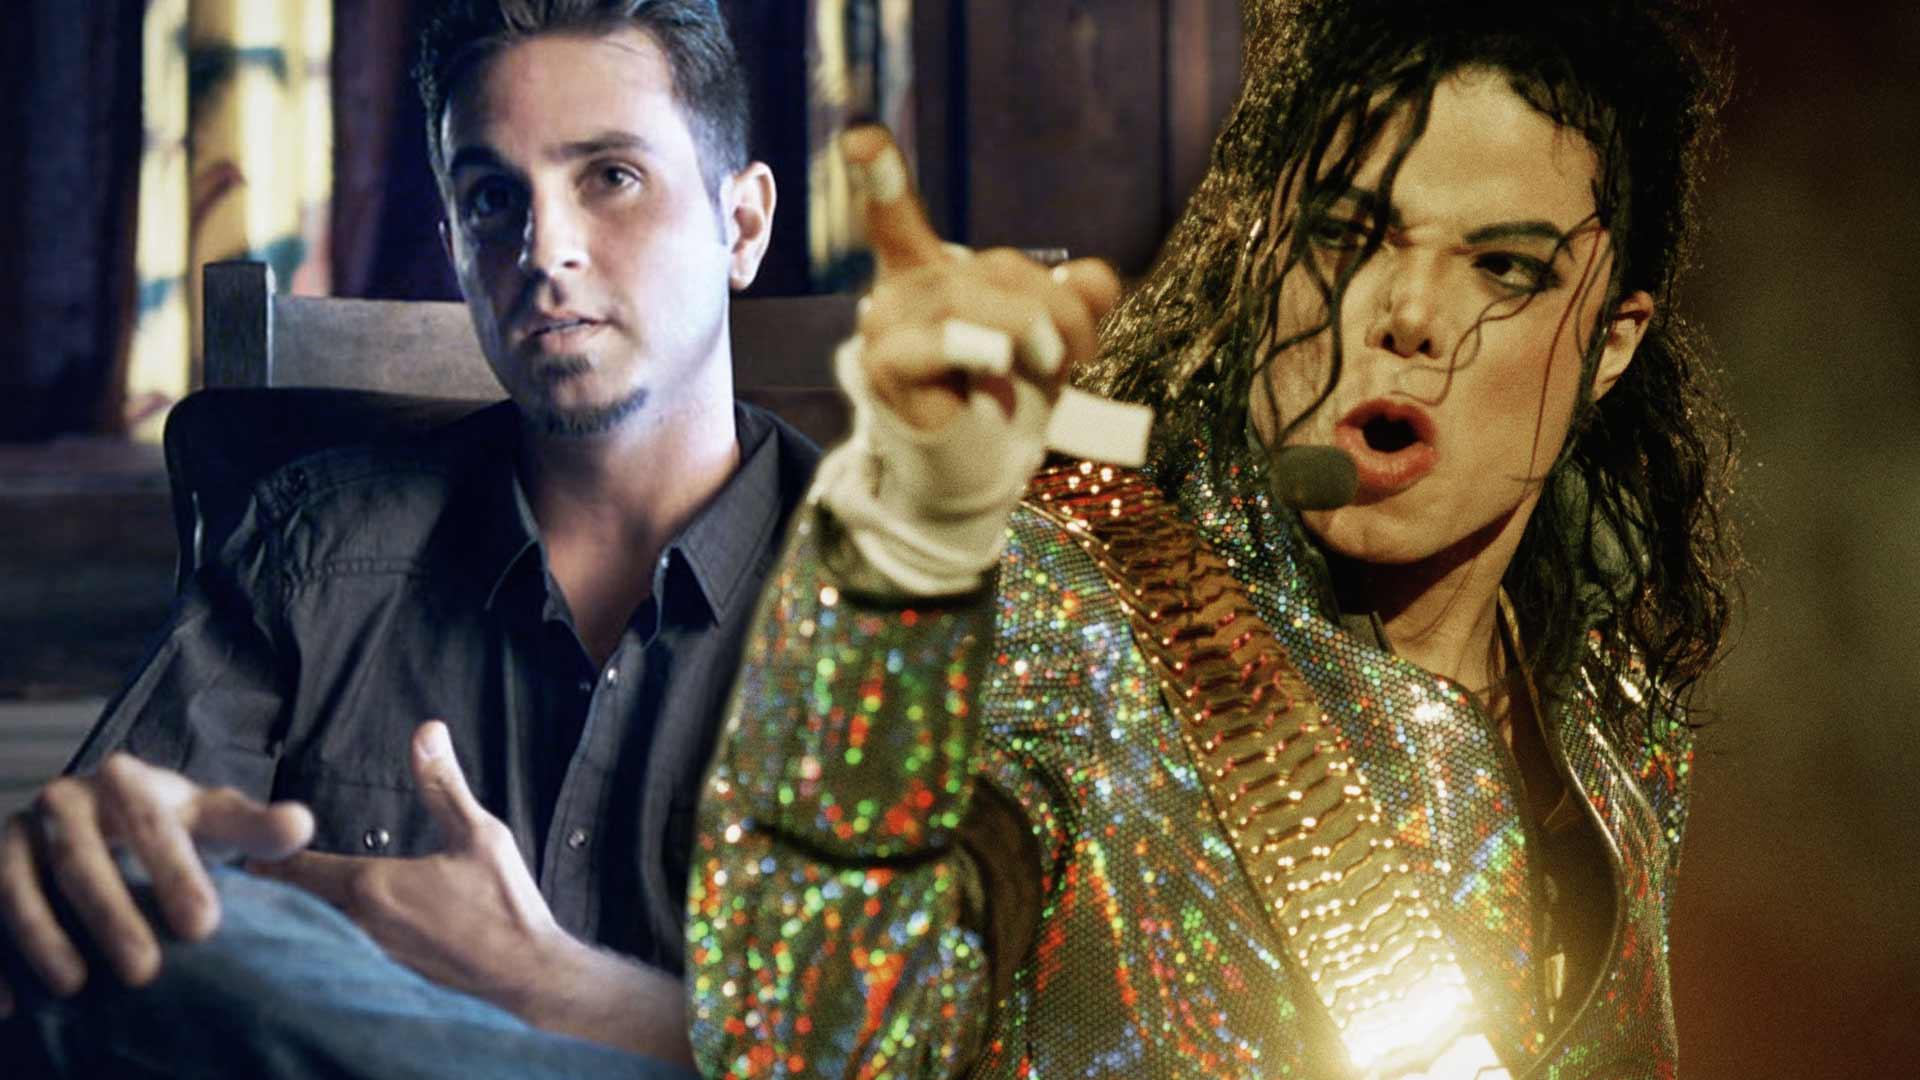 Michael Jackson’s Estate Slams Wade Robson While Shooting Down His Appeal in Abuse Case: ‘Overwhelming’ Evidence He’s Lying